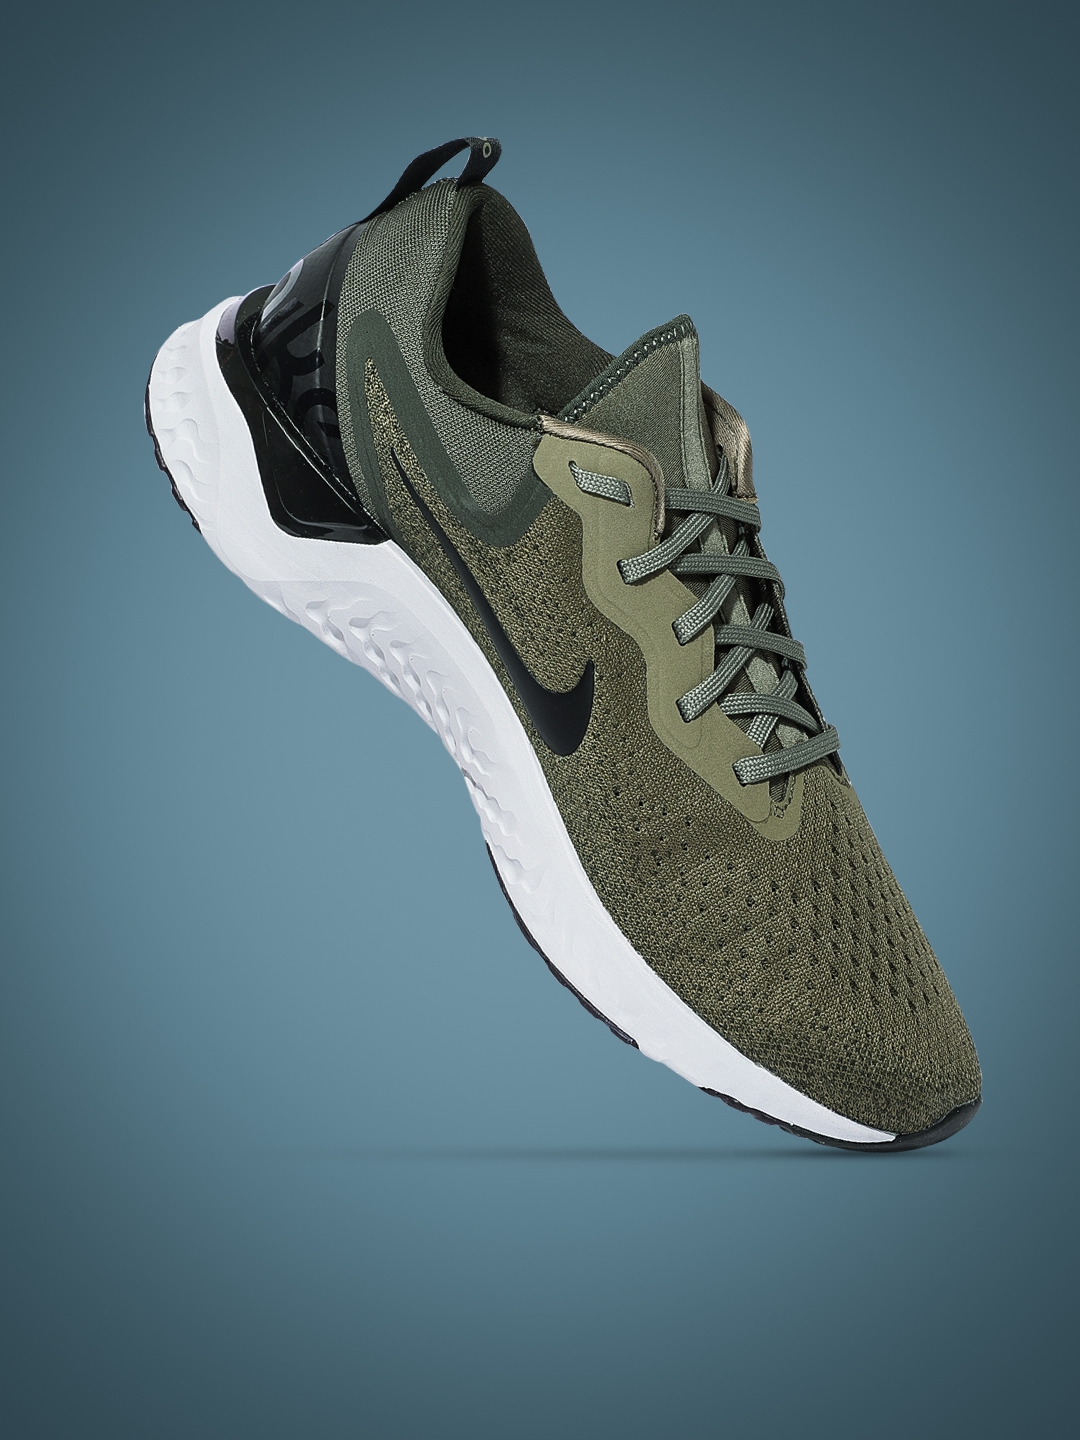 nike mens olive green shoes